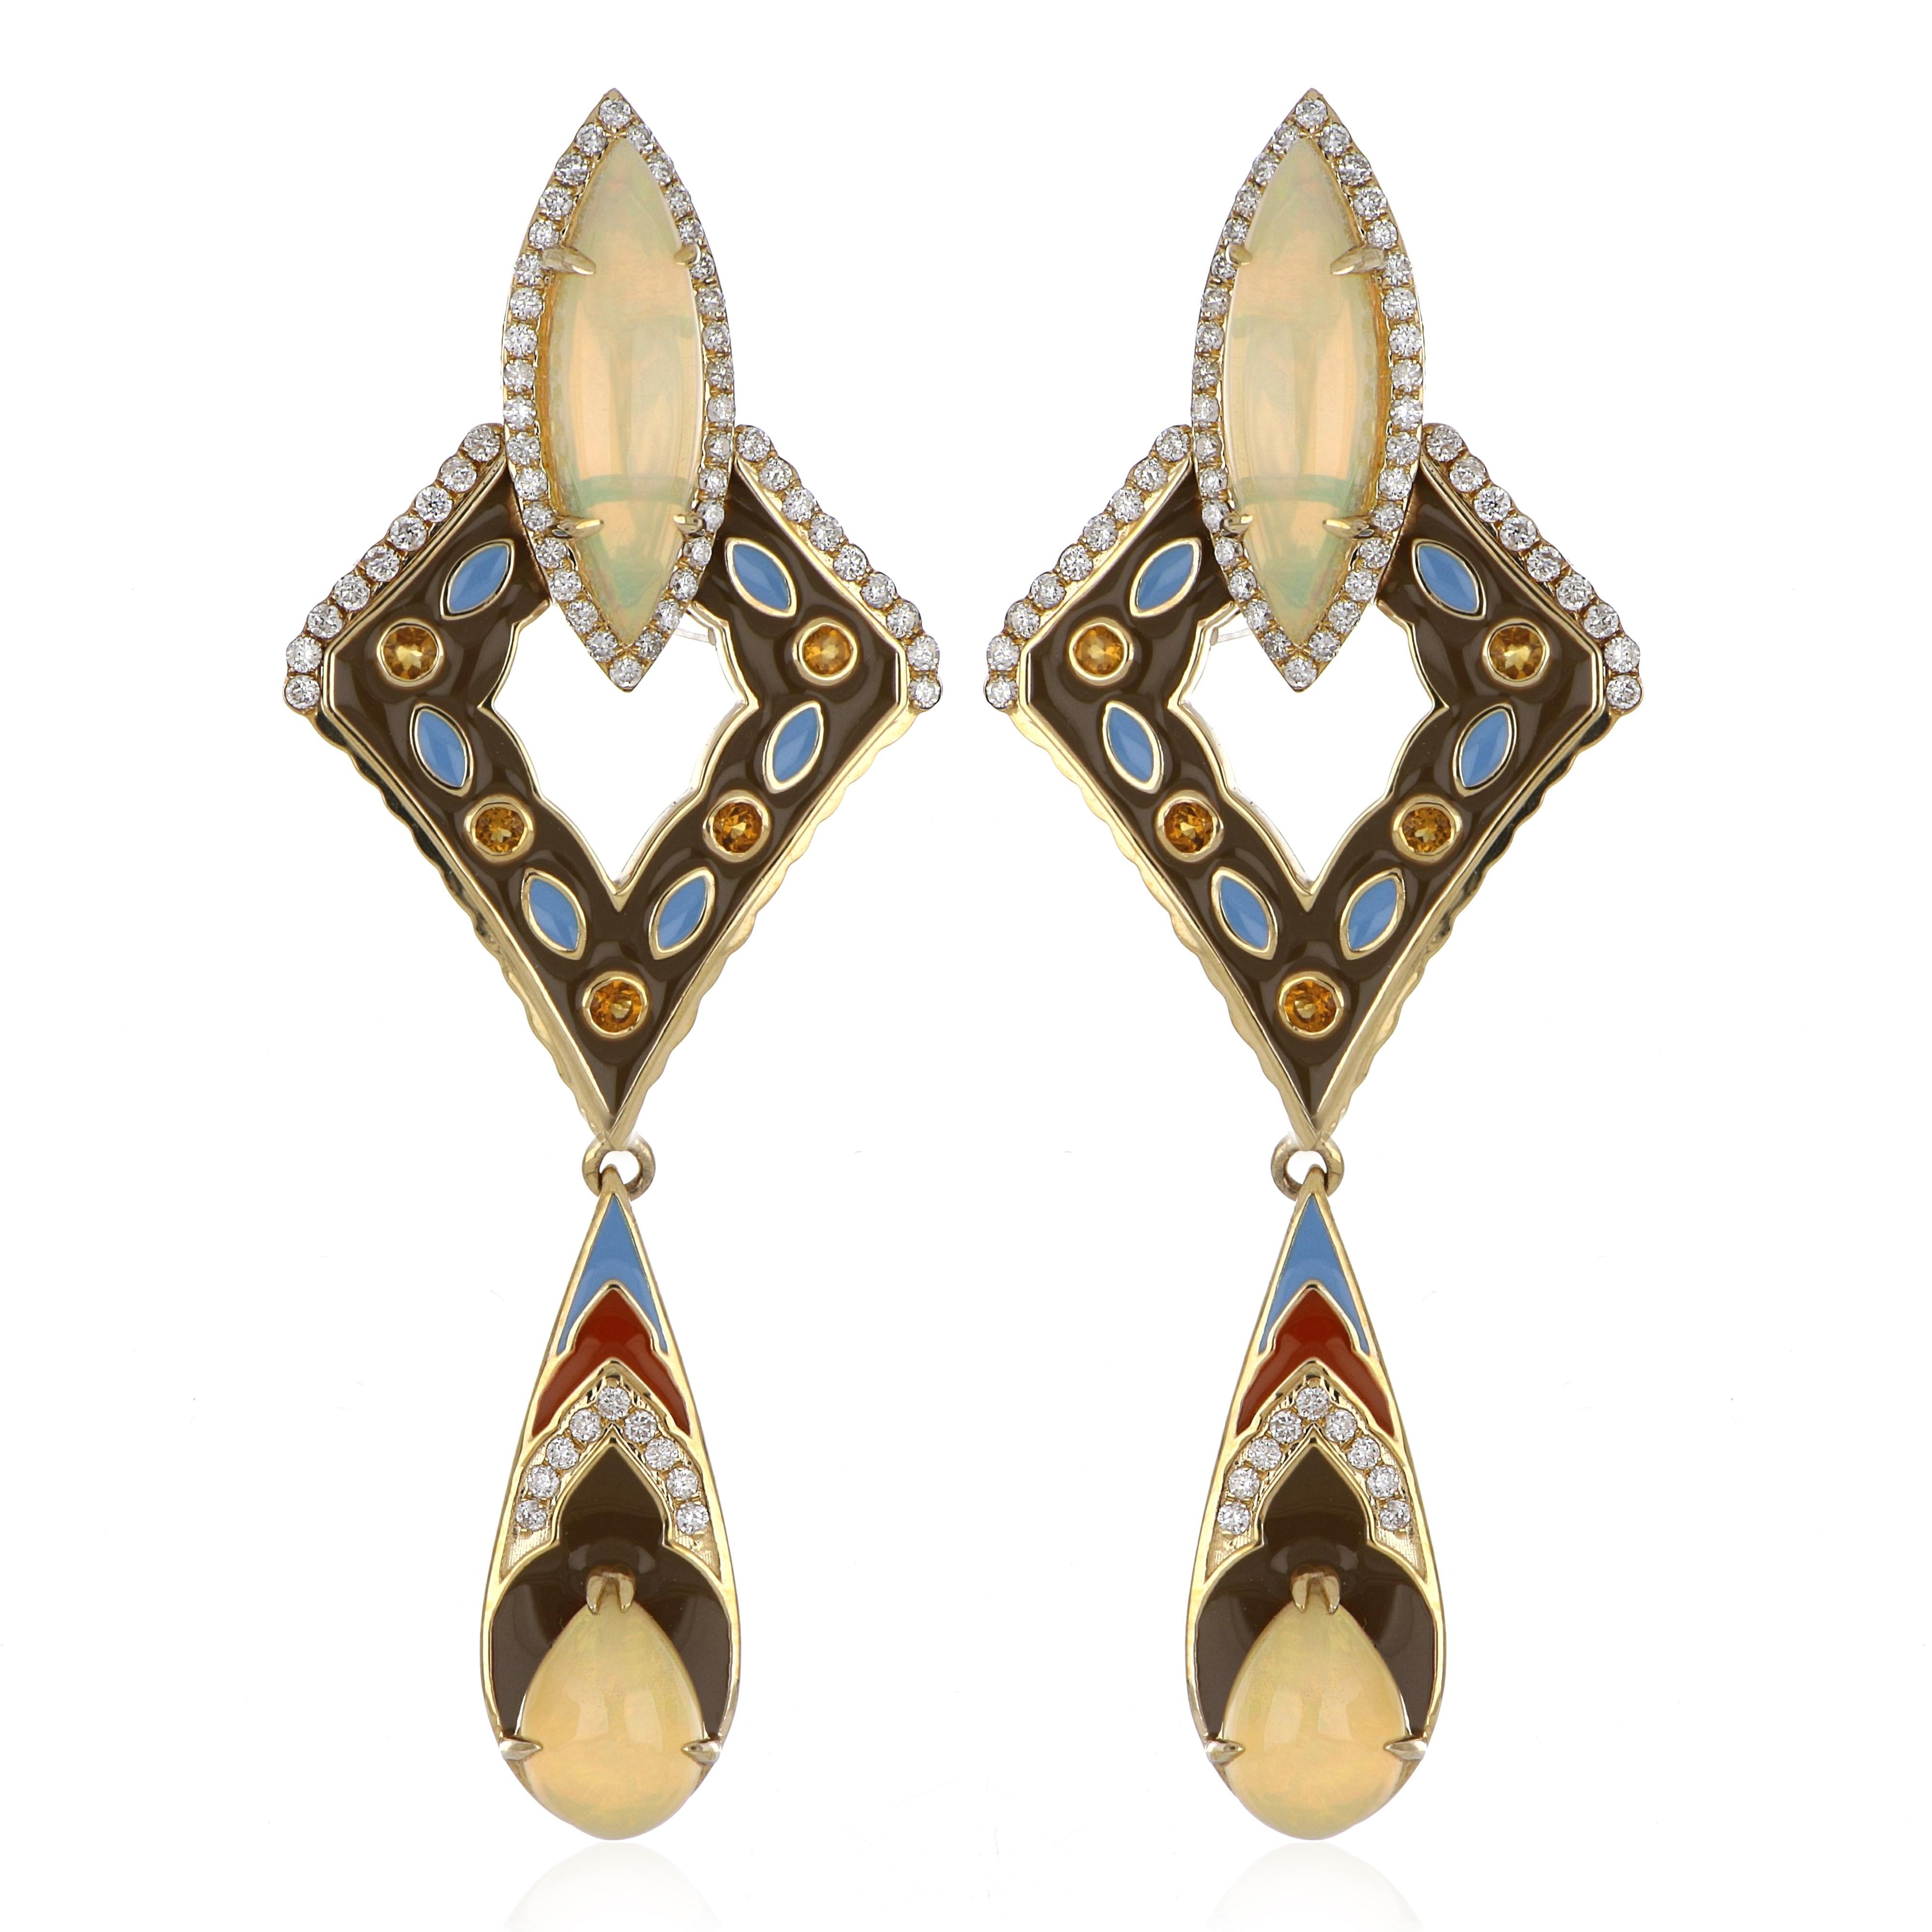 Elegant and exquisite Multi Color Enamel Cocktail 14 K Earring, set with  3.90 Cts. (Total) Cabochon Pear & Fancy Marquise Ethiopian Opal, Surrounded with 0.26 Cts Citrine accented with Diamonds, weighing approx. 0.69 Cts. Beautifully Hand crafted